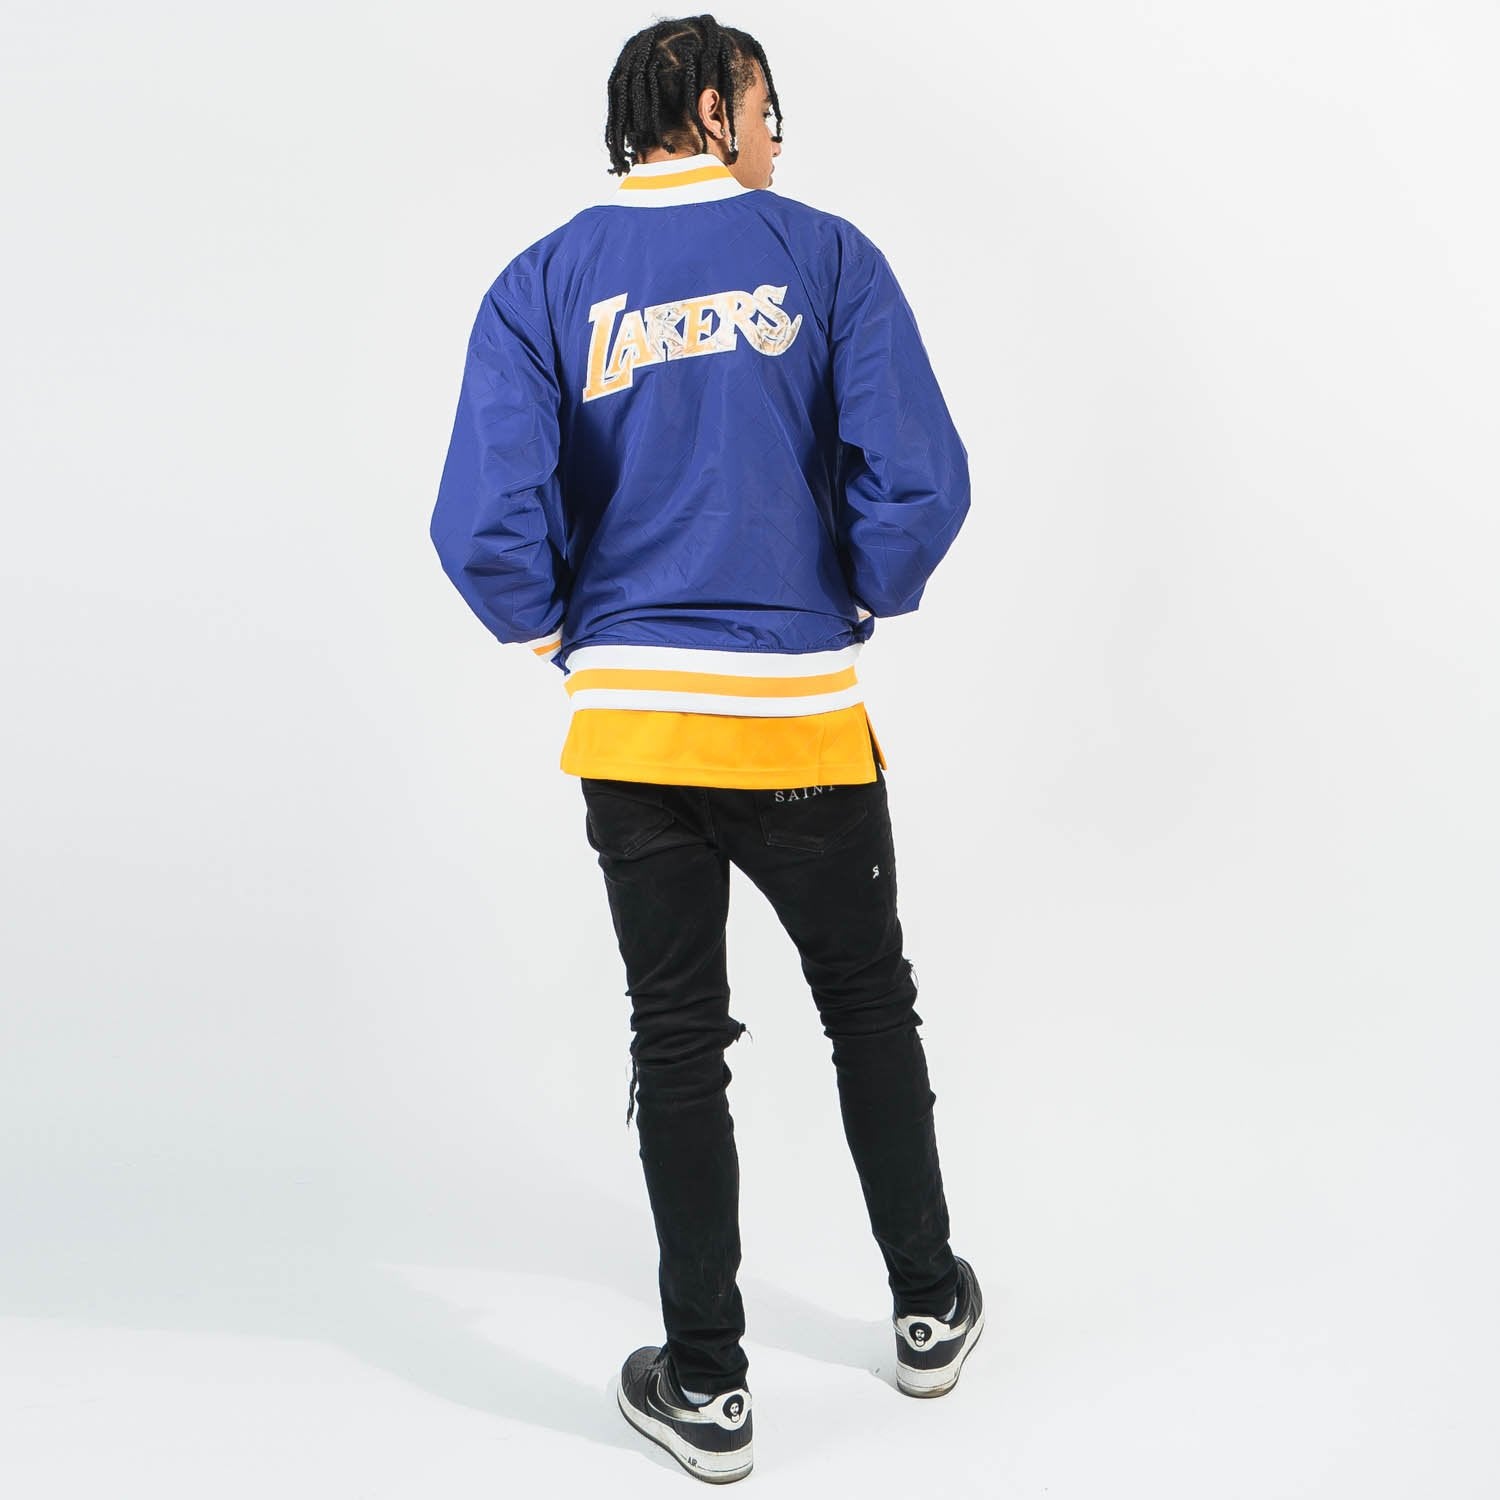 Mitcell & Ness LA Lakers 75th Anniversary Warm Up Jacket